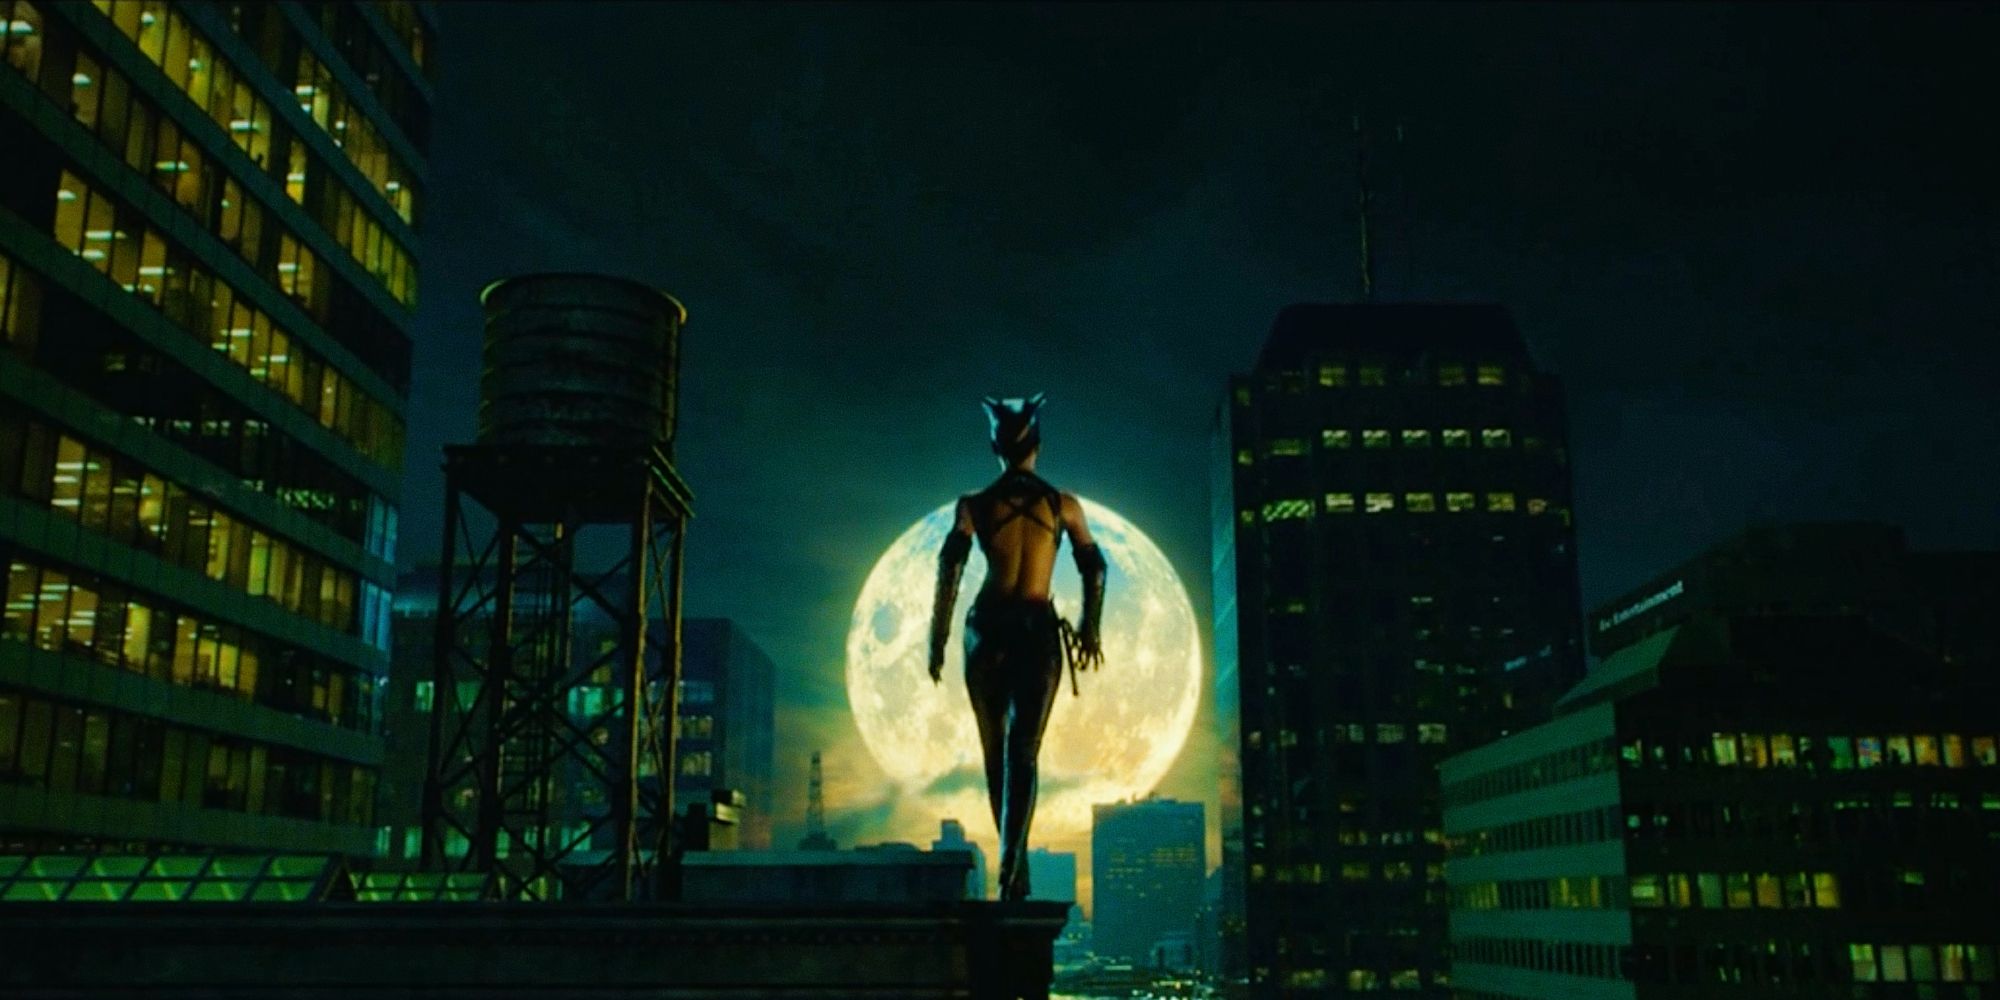 Catwoman stands in front of a full moon in Catwoman